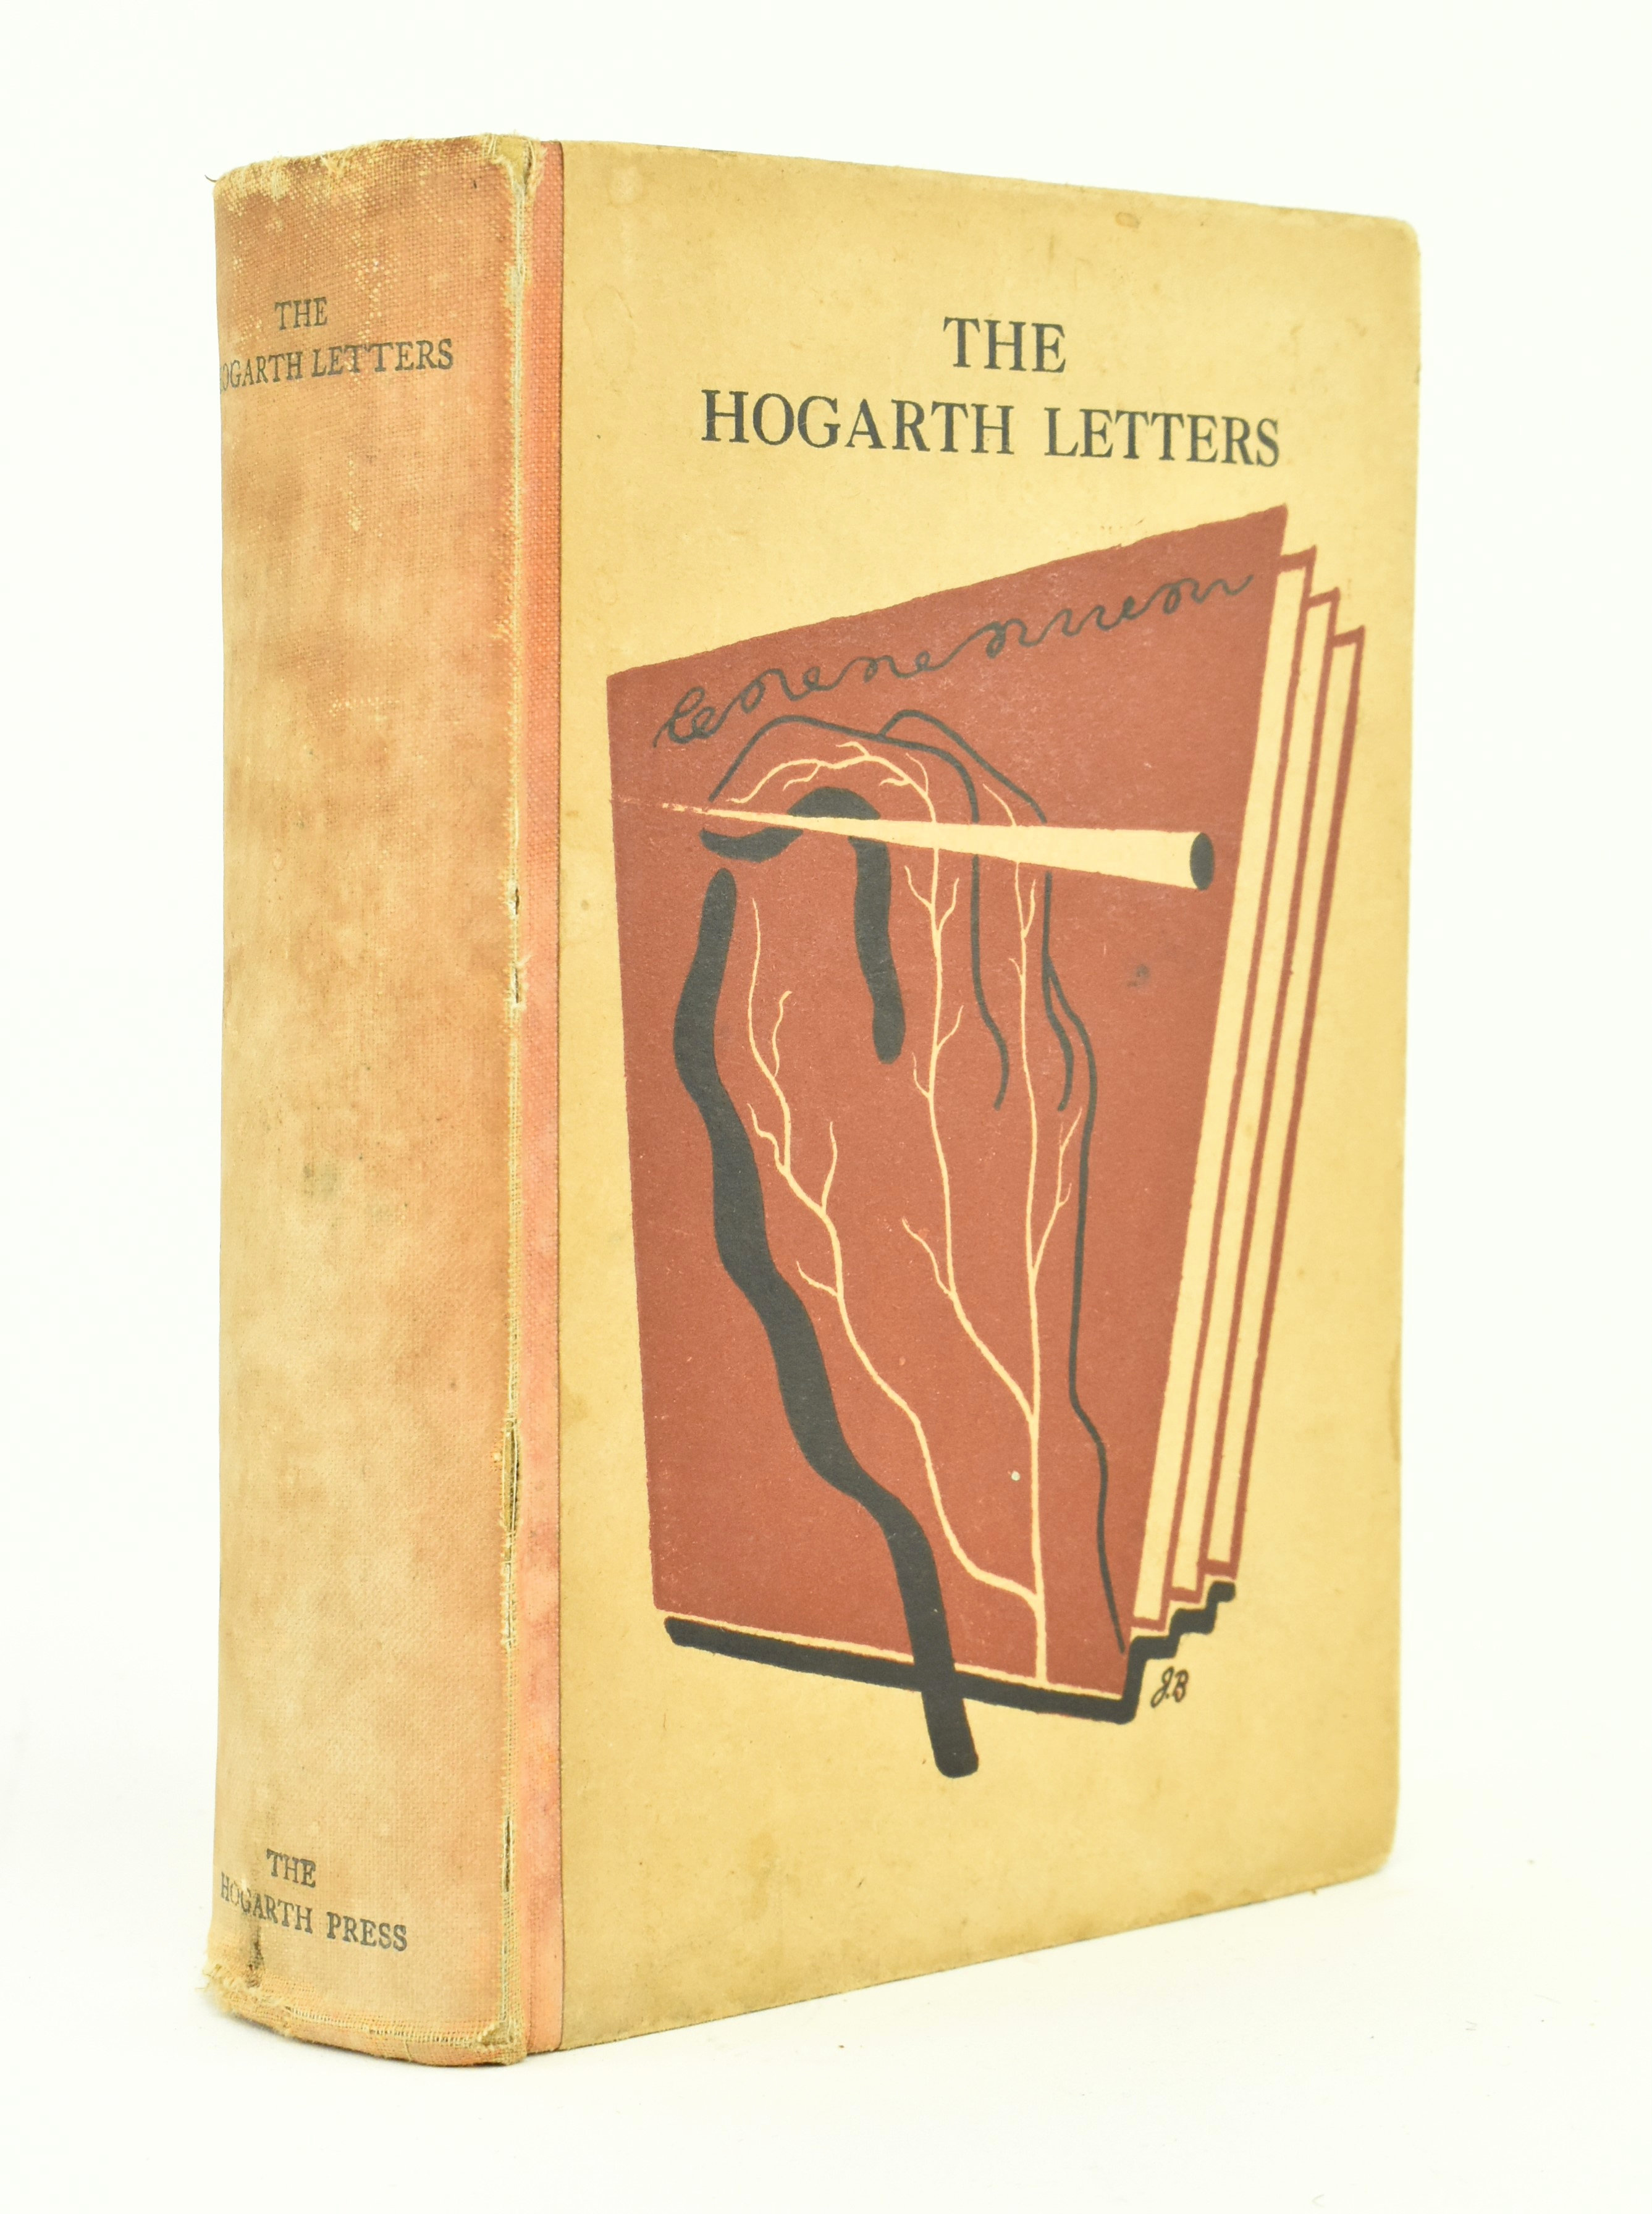 HOGARTH PRESS. 1933 THE HOGARTH LETTERS, ONE OF 500 COPIES